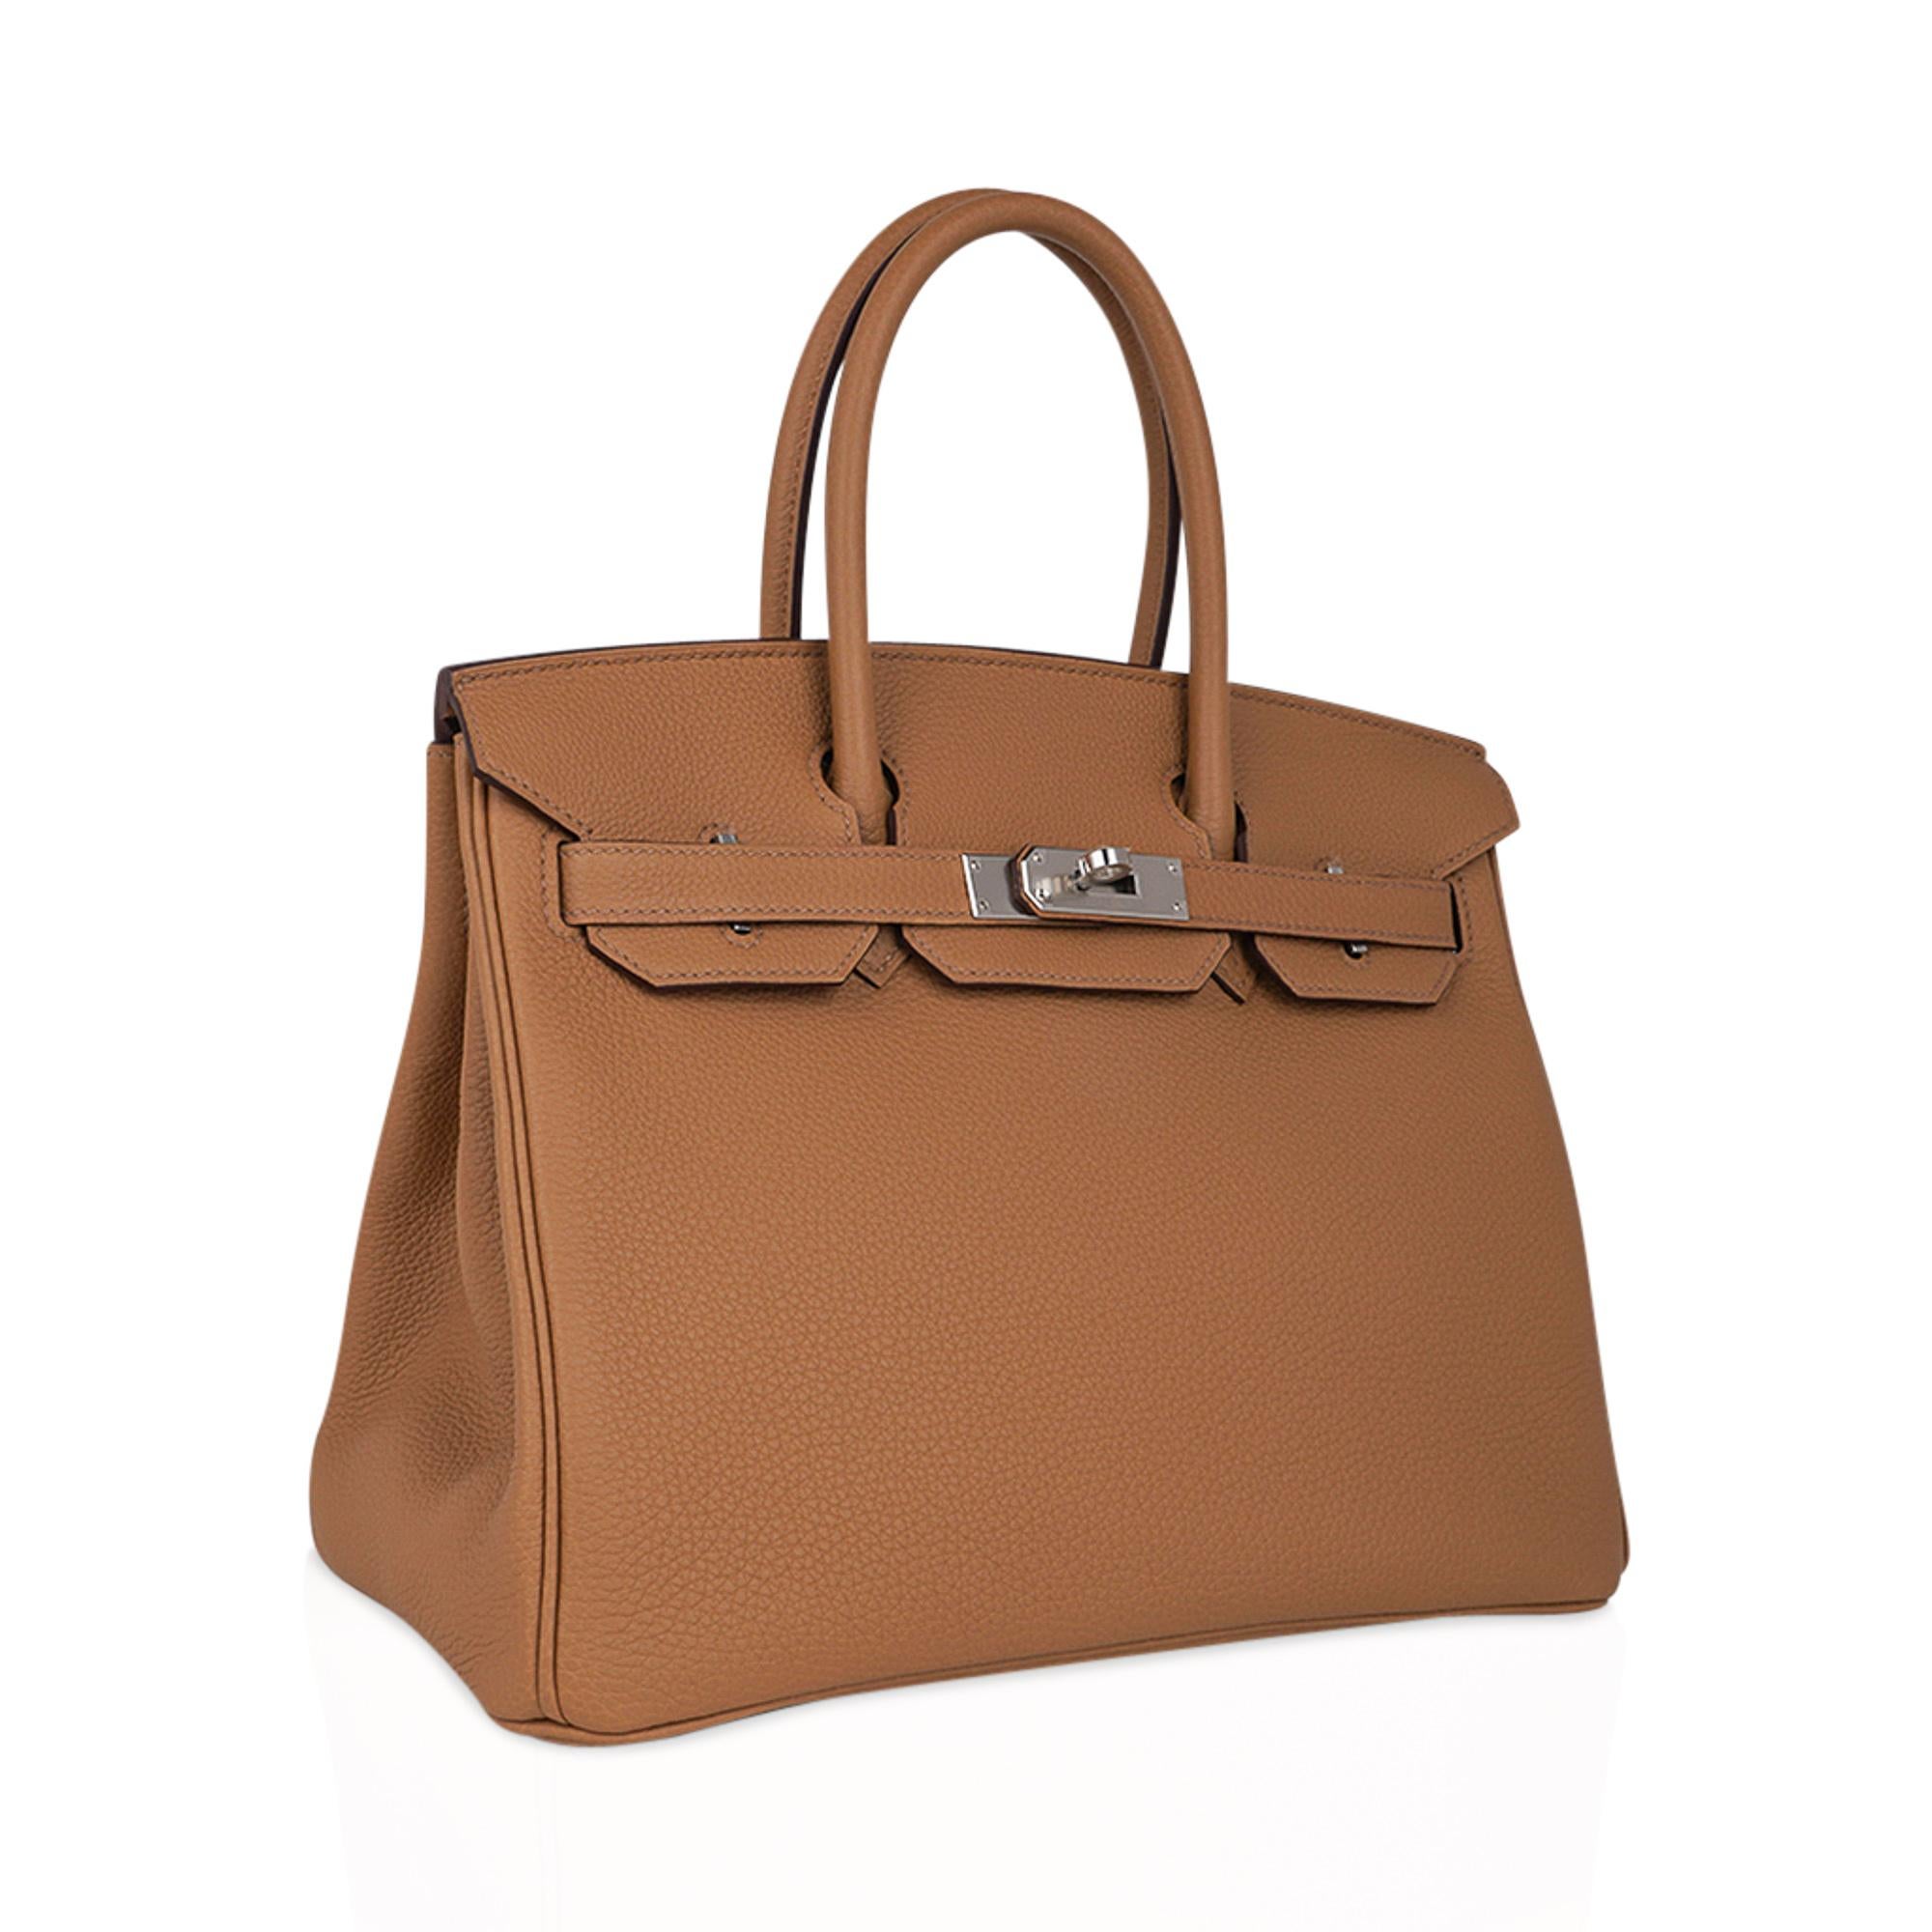 Mightychic offers an Hermes Birkin 30 bag featured in warm Biscuit.
Togo leather with fresh palladium hardware accentuates the beautiful colour of this Birkin bag.
This beauty will take you year round.
Comes with the lock and keys in the clochette,